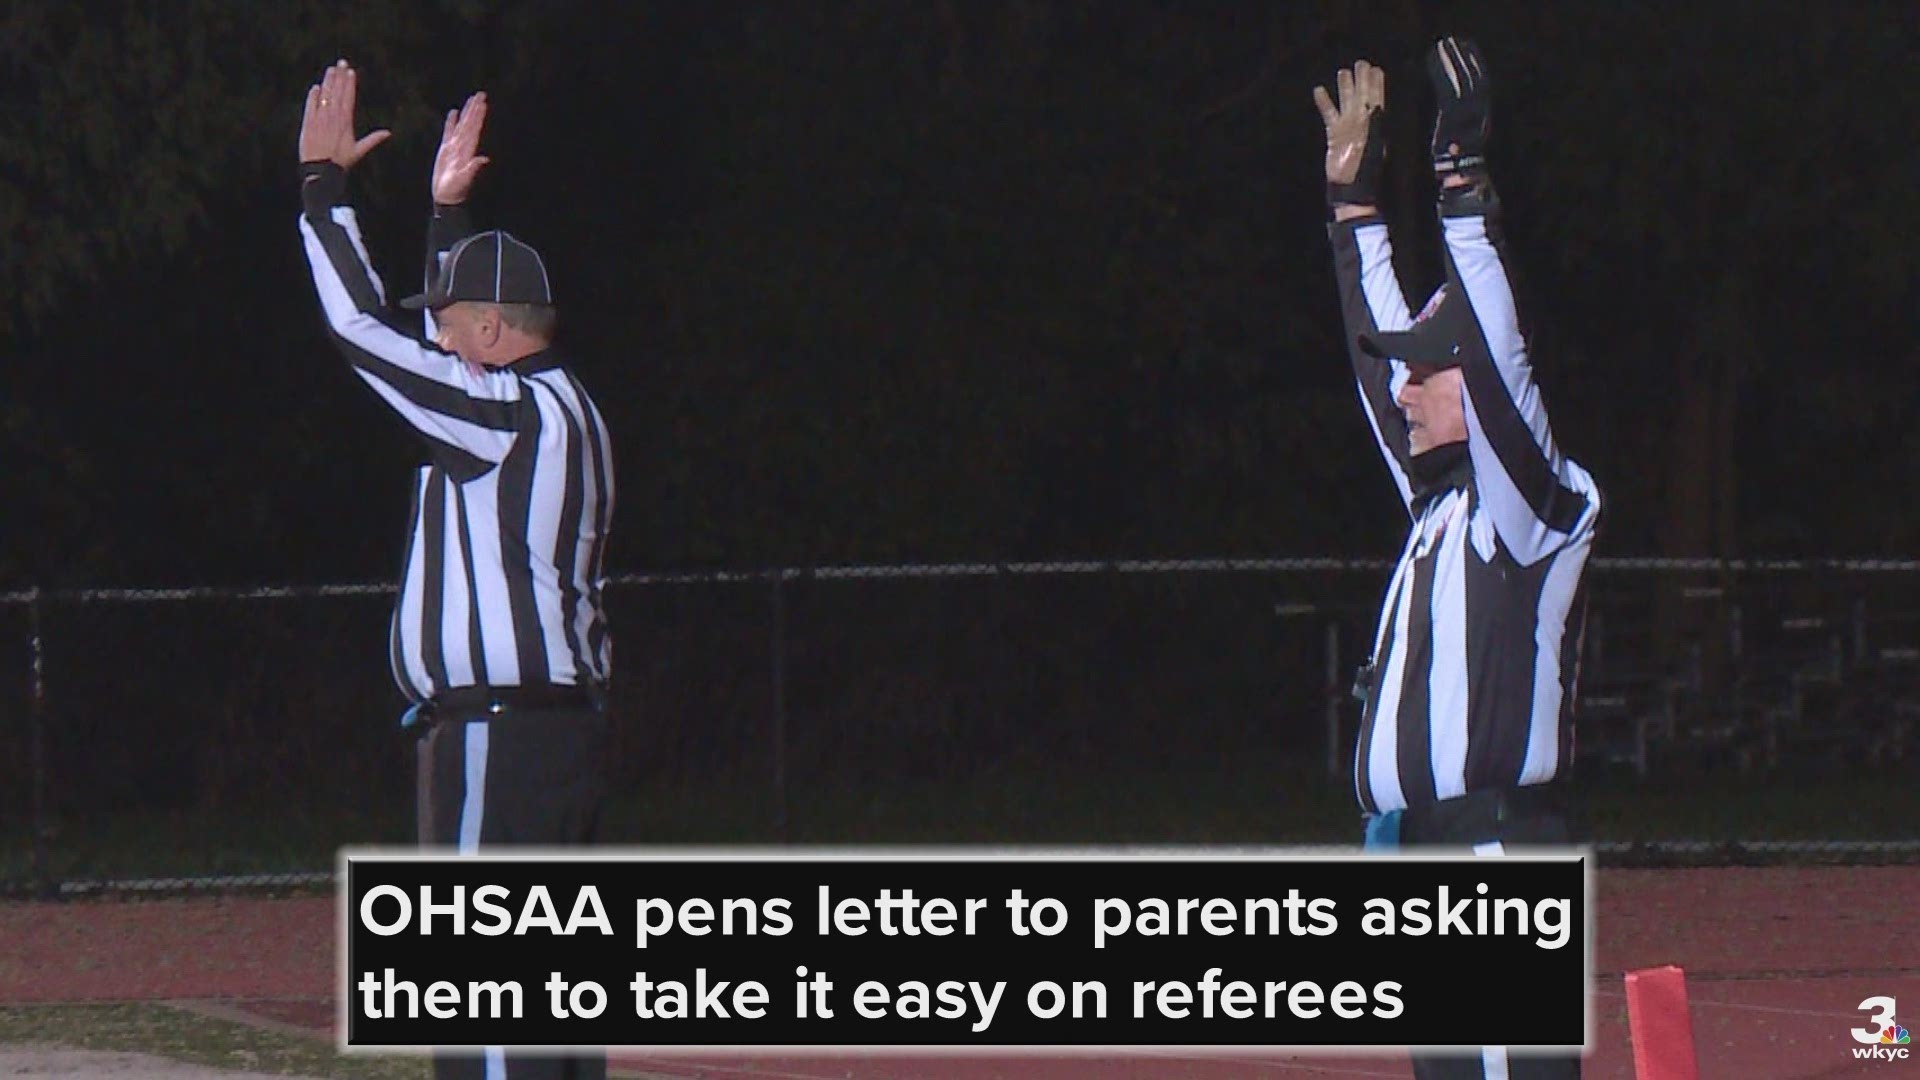 Ohio now has 'an alarming shortage' of referees to officiate high school sporting events